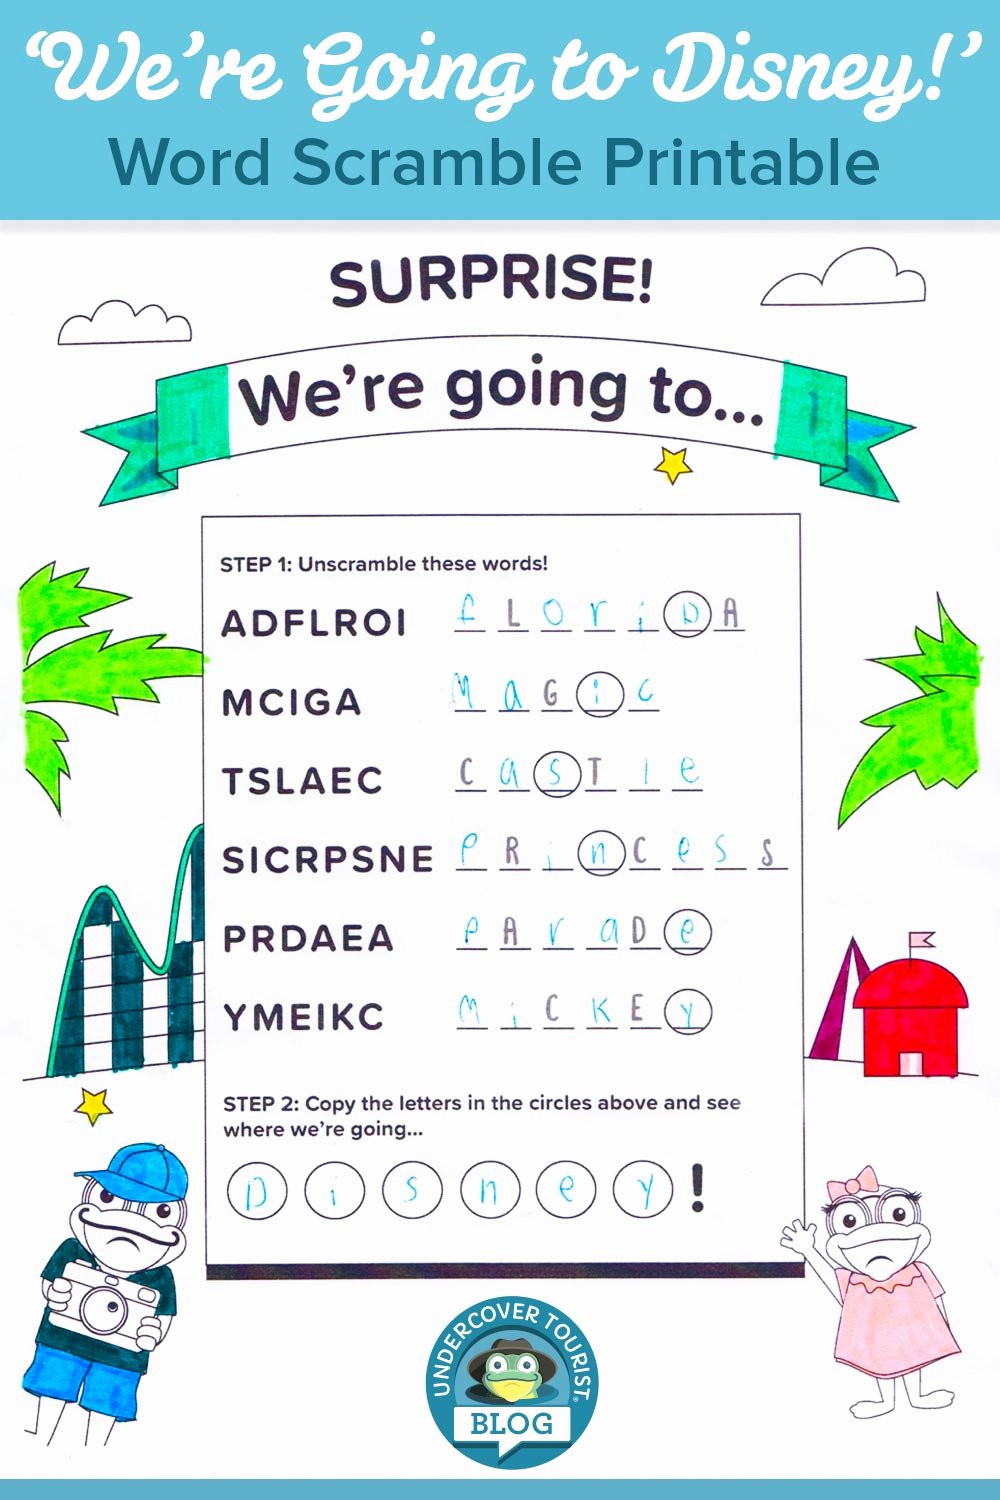 Disney Surprise Letter Template Awesome We Re Going to Disney Tips &amp; Ideas to Surprise Your Kids